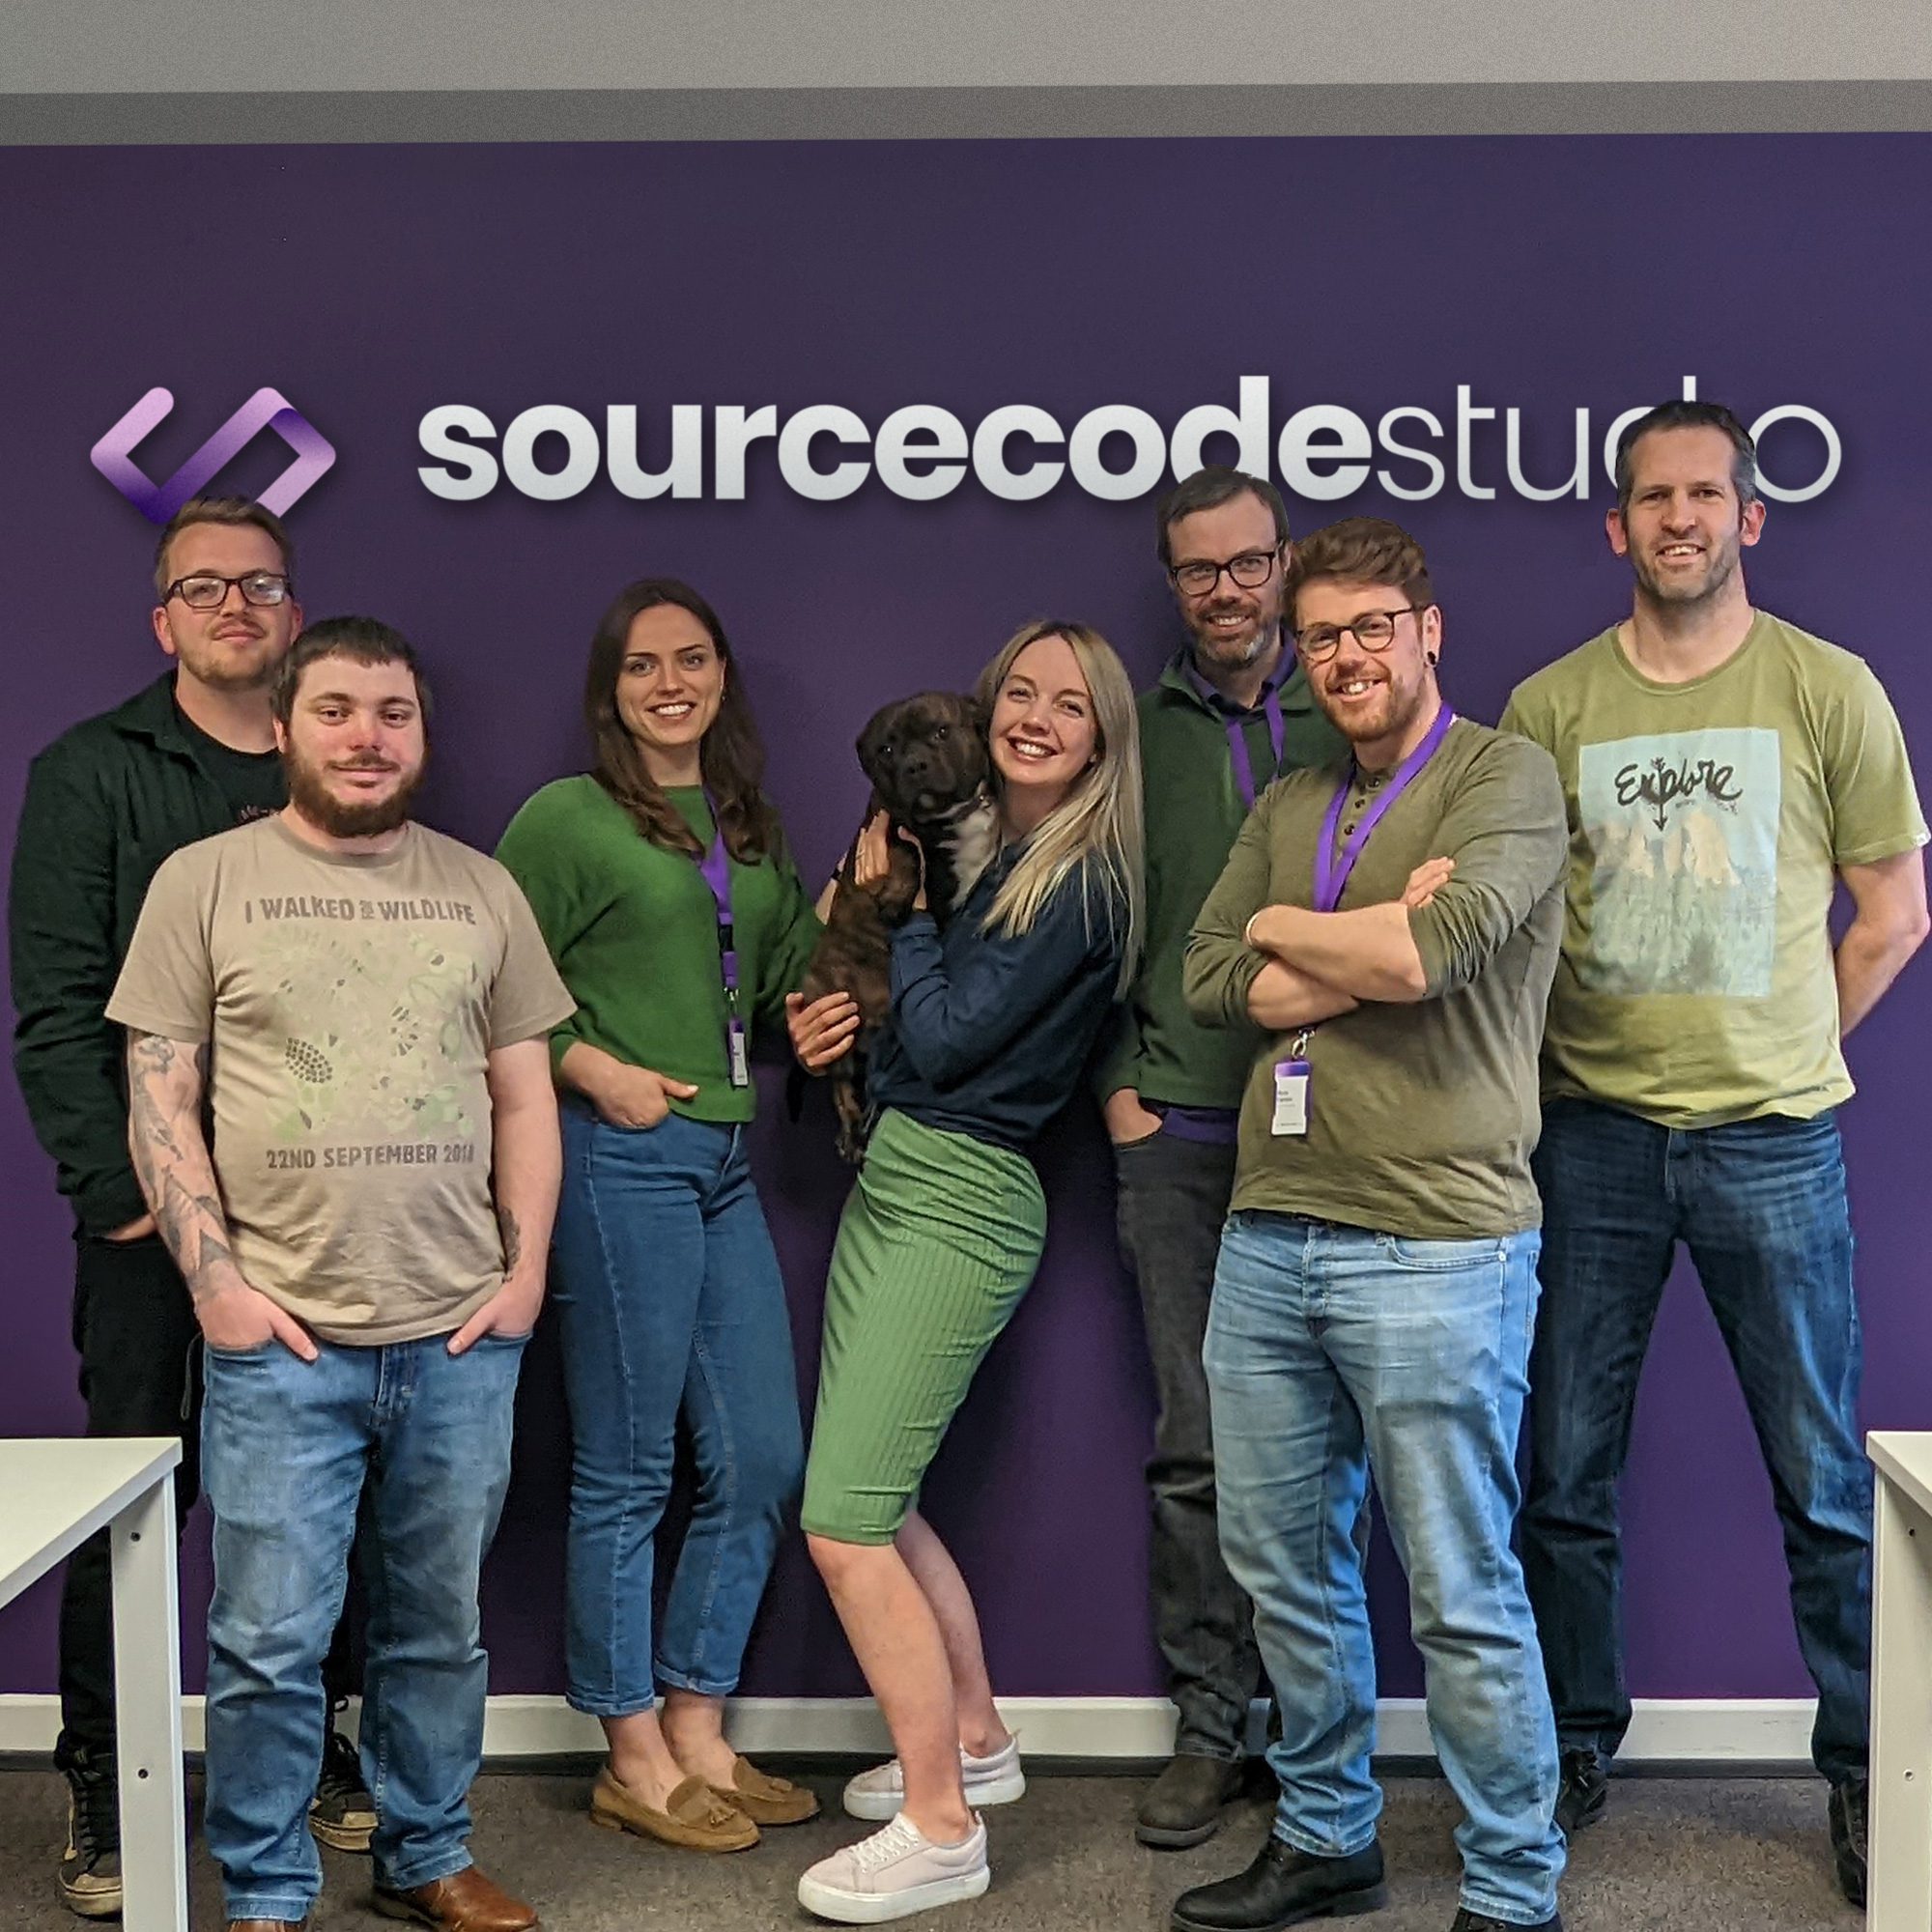 The SourceCodeStudio team wearing green for Earth Day 2022